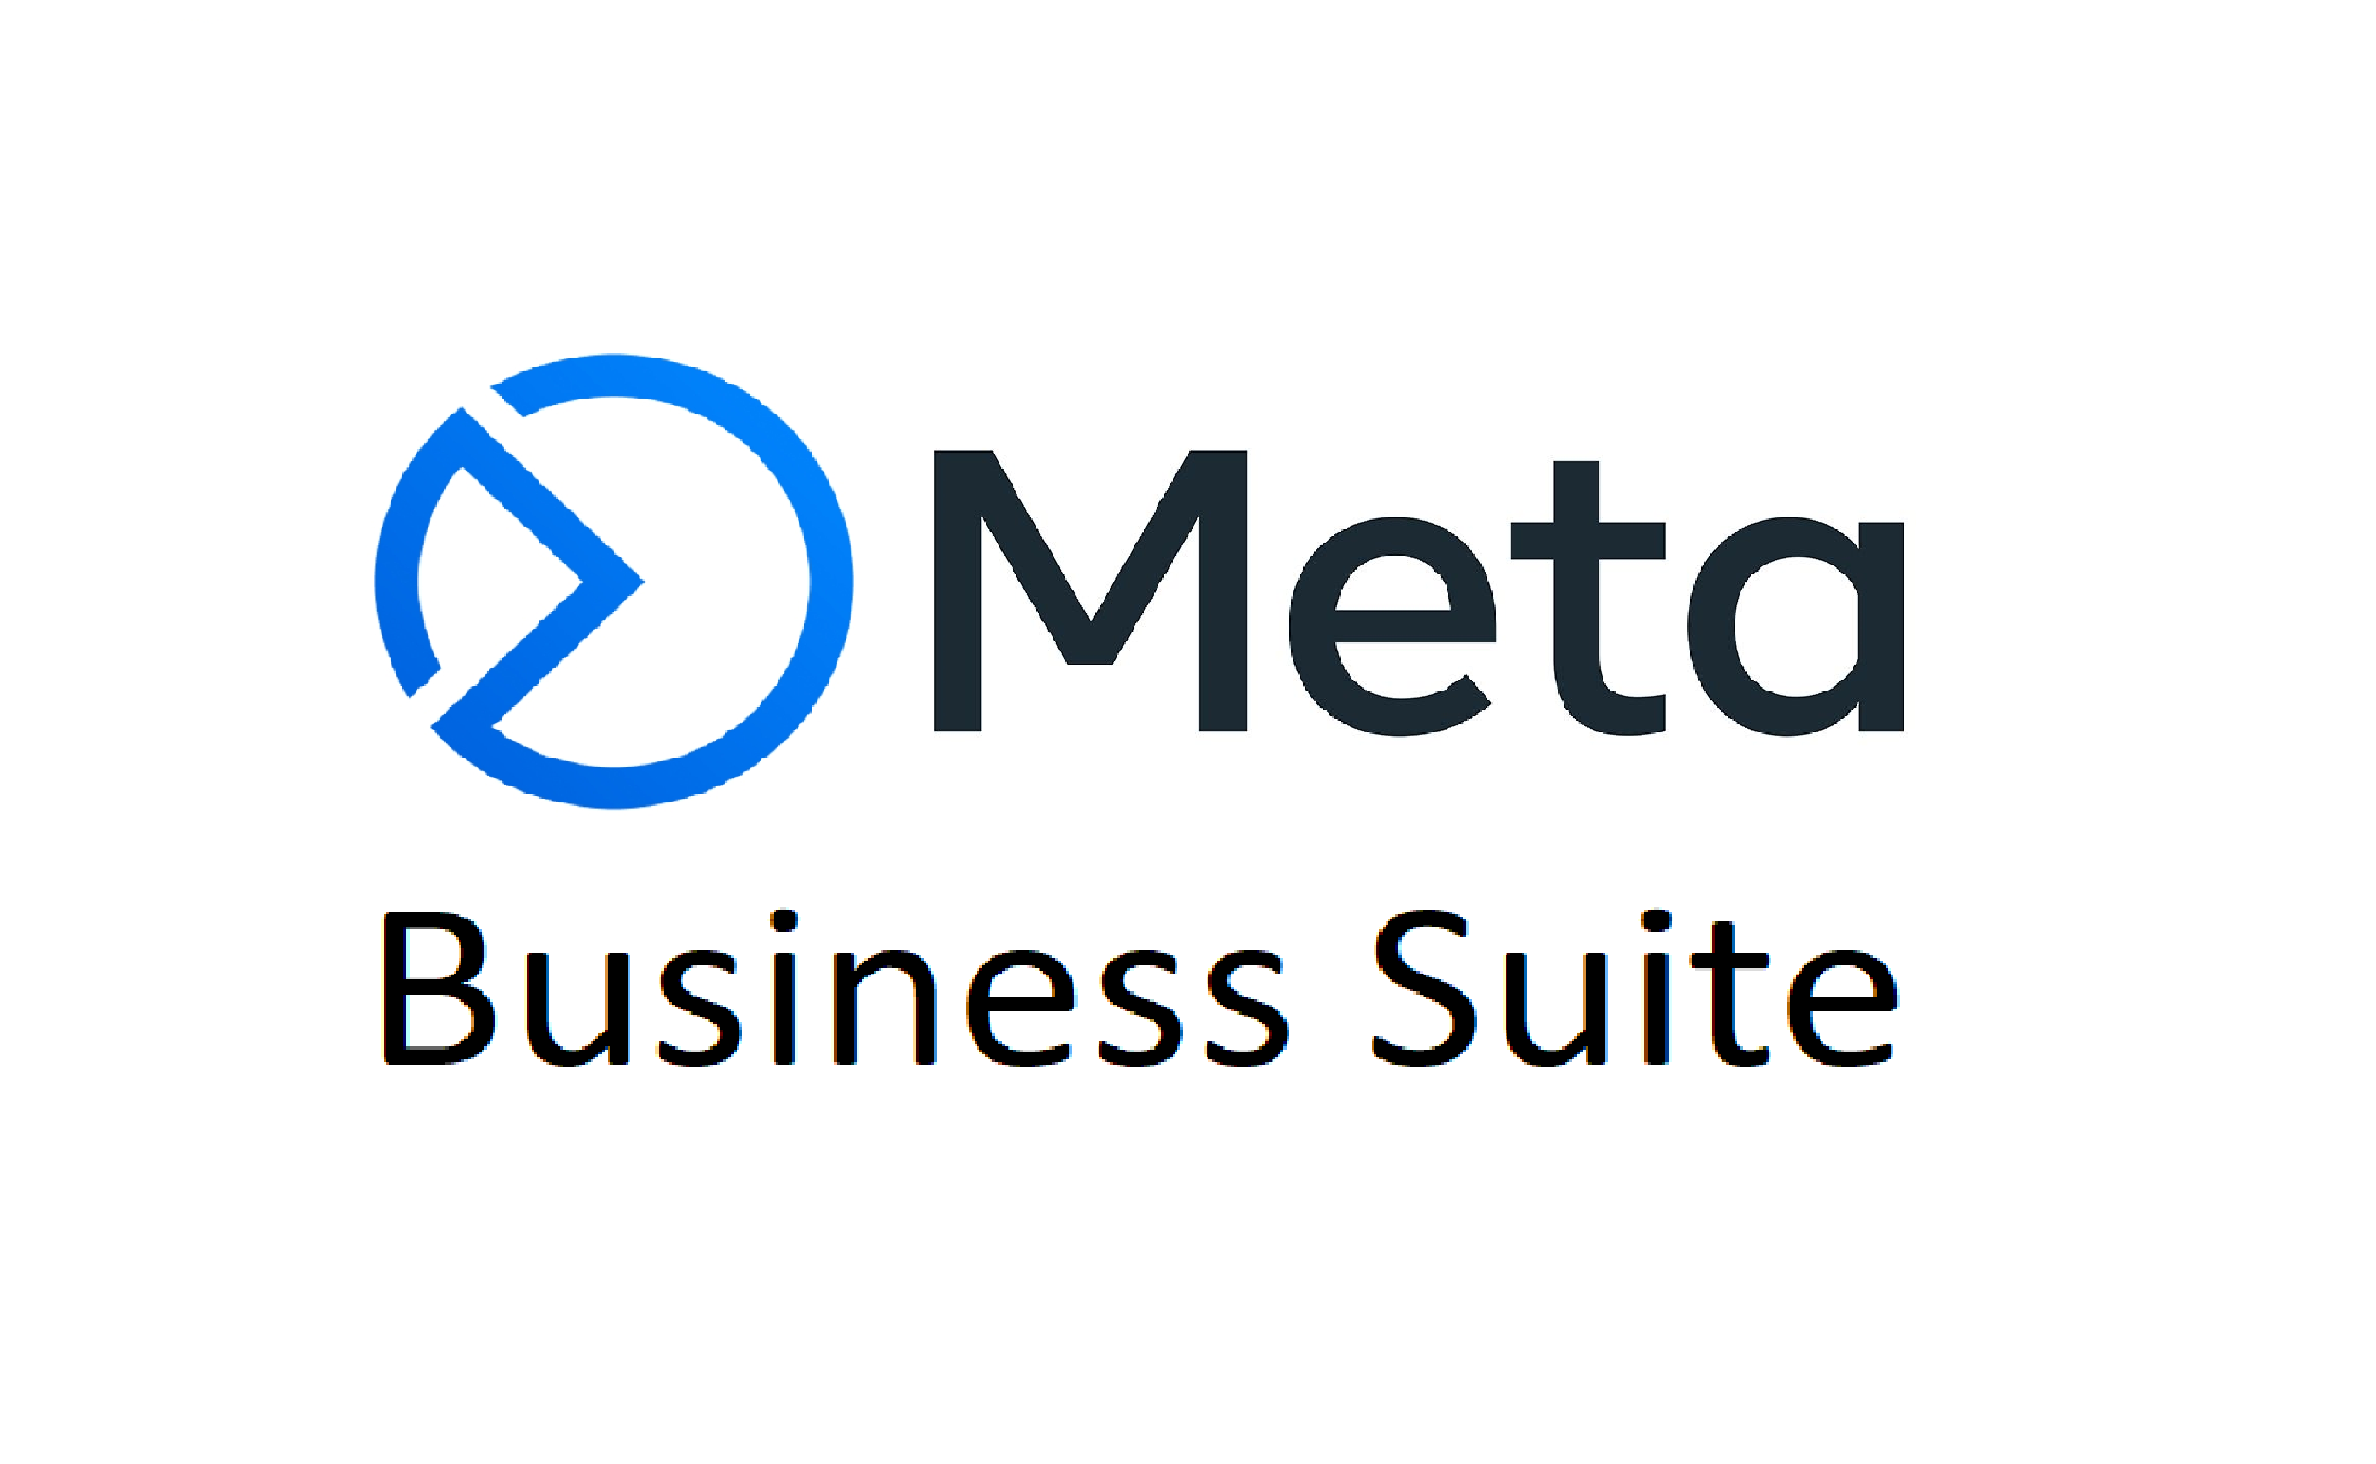 How to use the meta business suite 